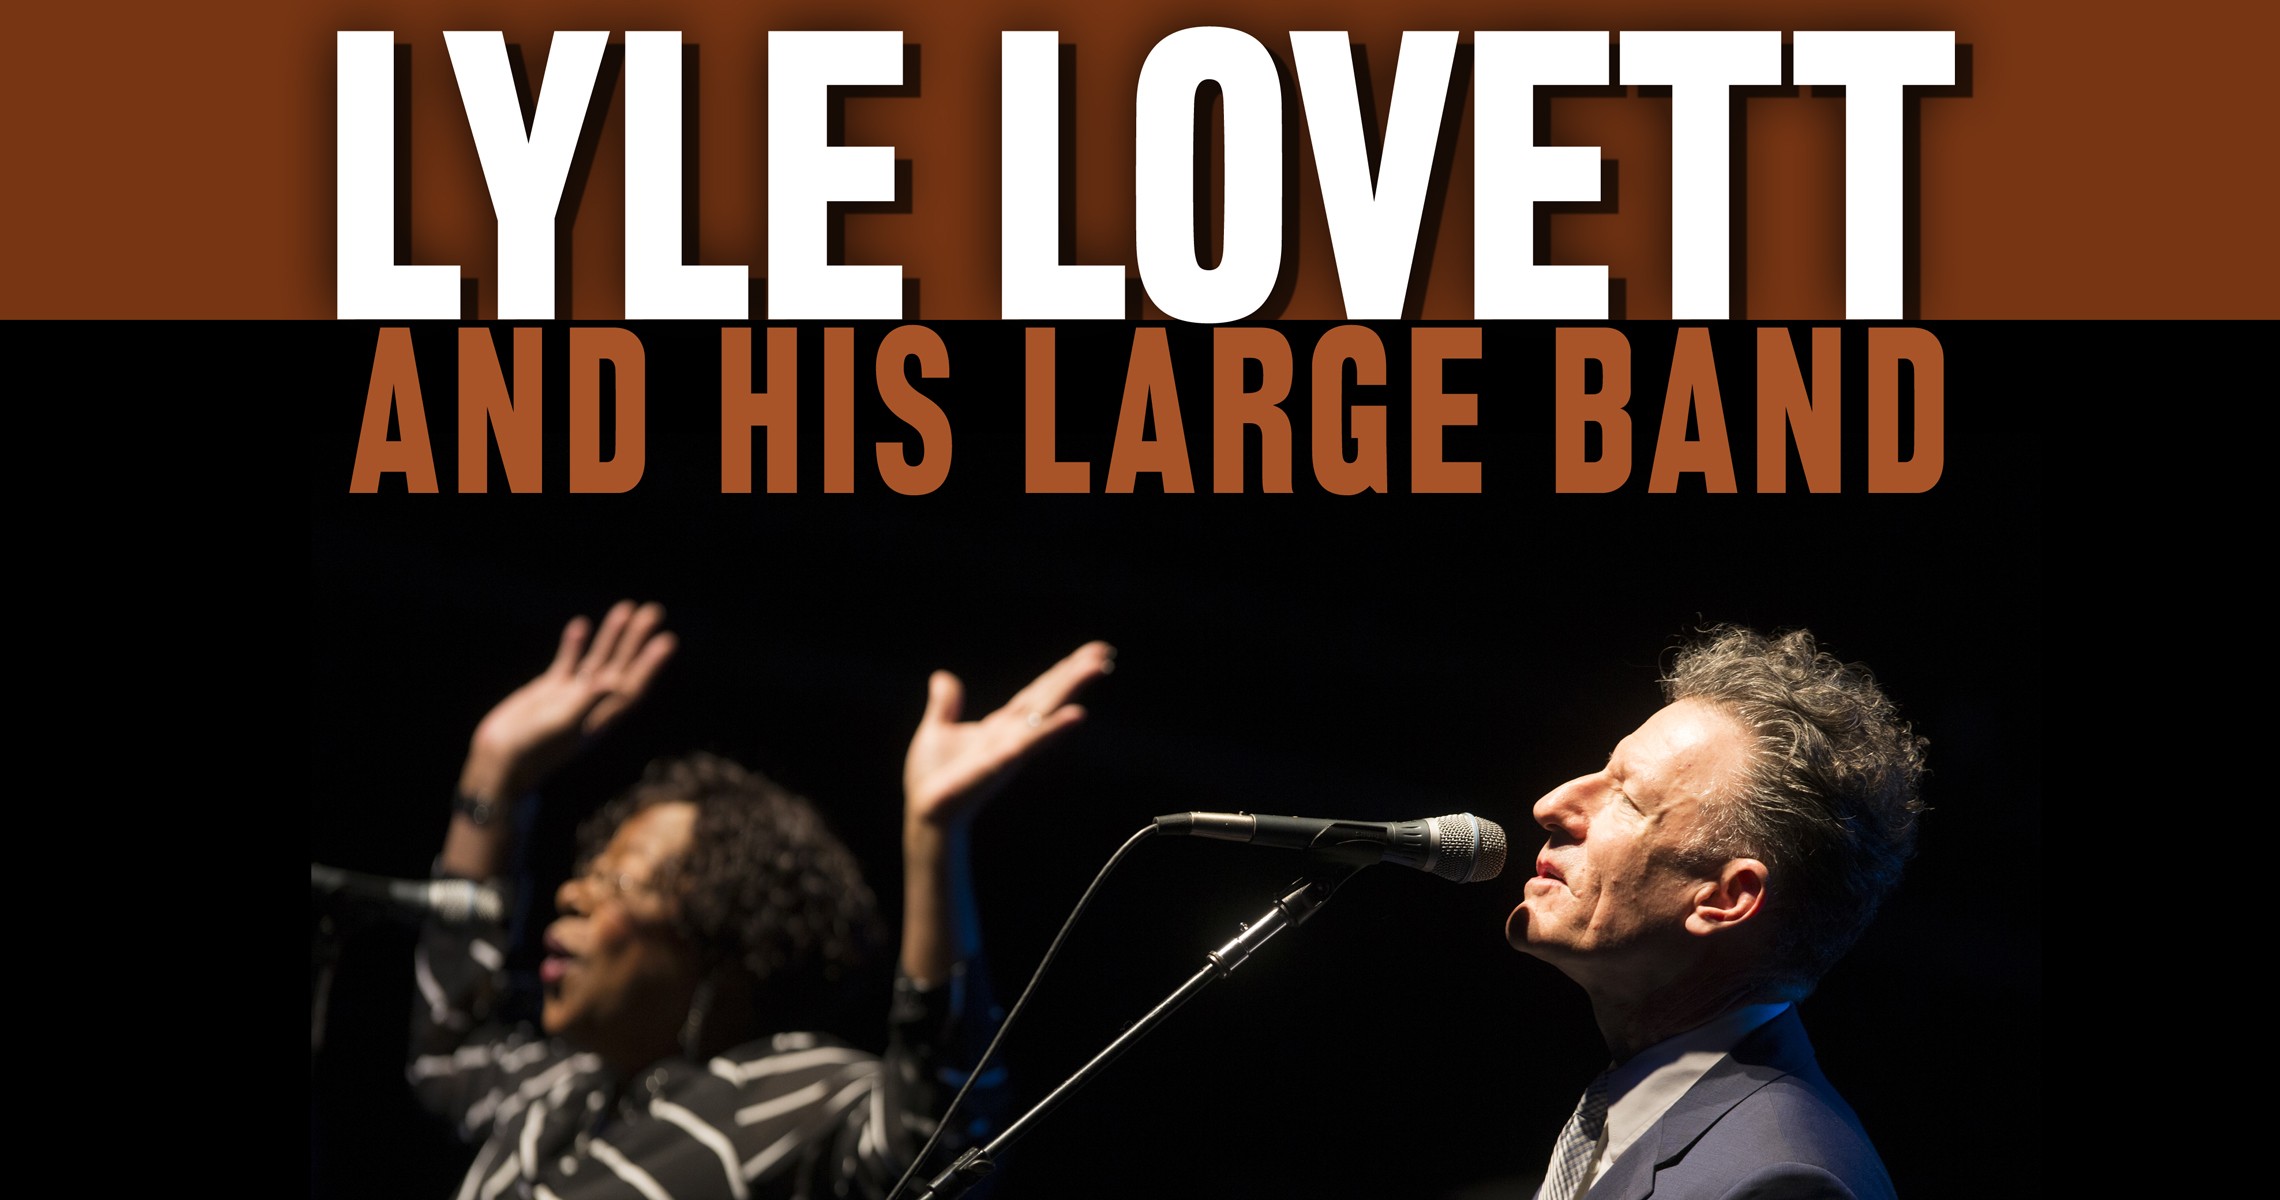 An Evening with Lyle Lovett and his Large Band Live at the Eccles